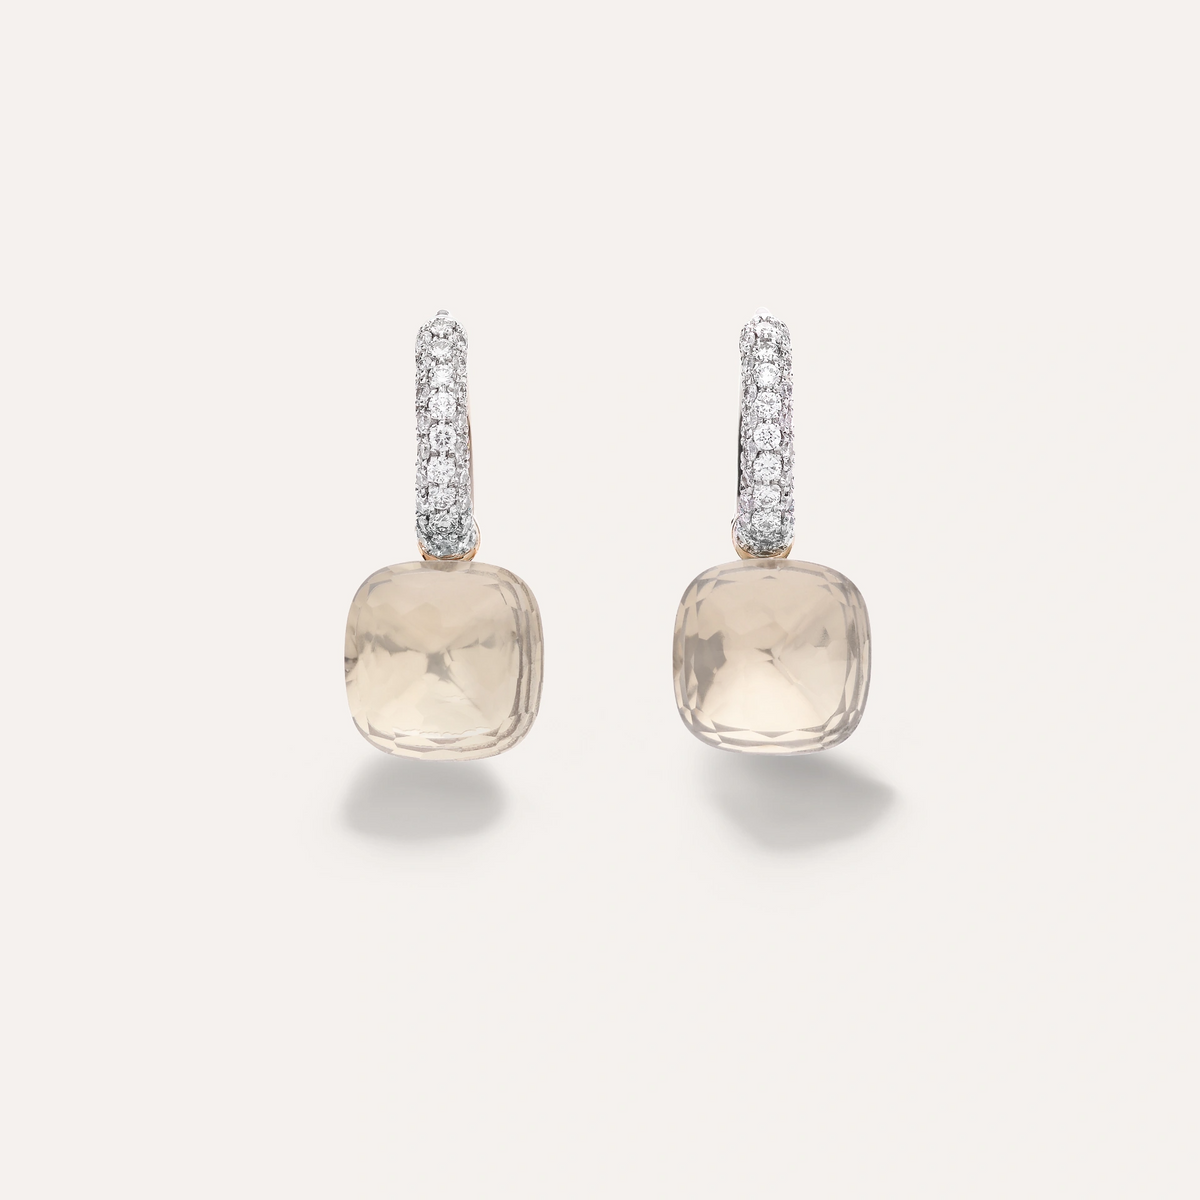 pomellato nudo earring in 18k rose and white gold with white topaz and diamonds